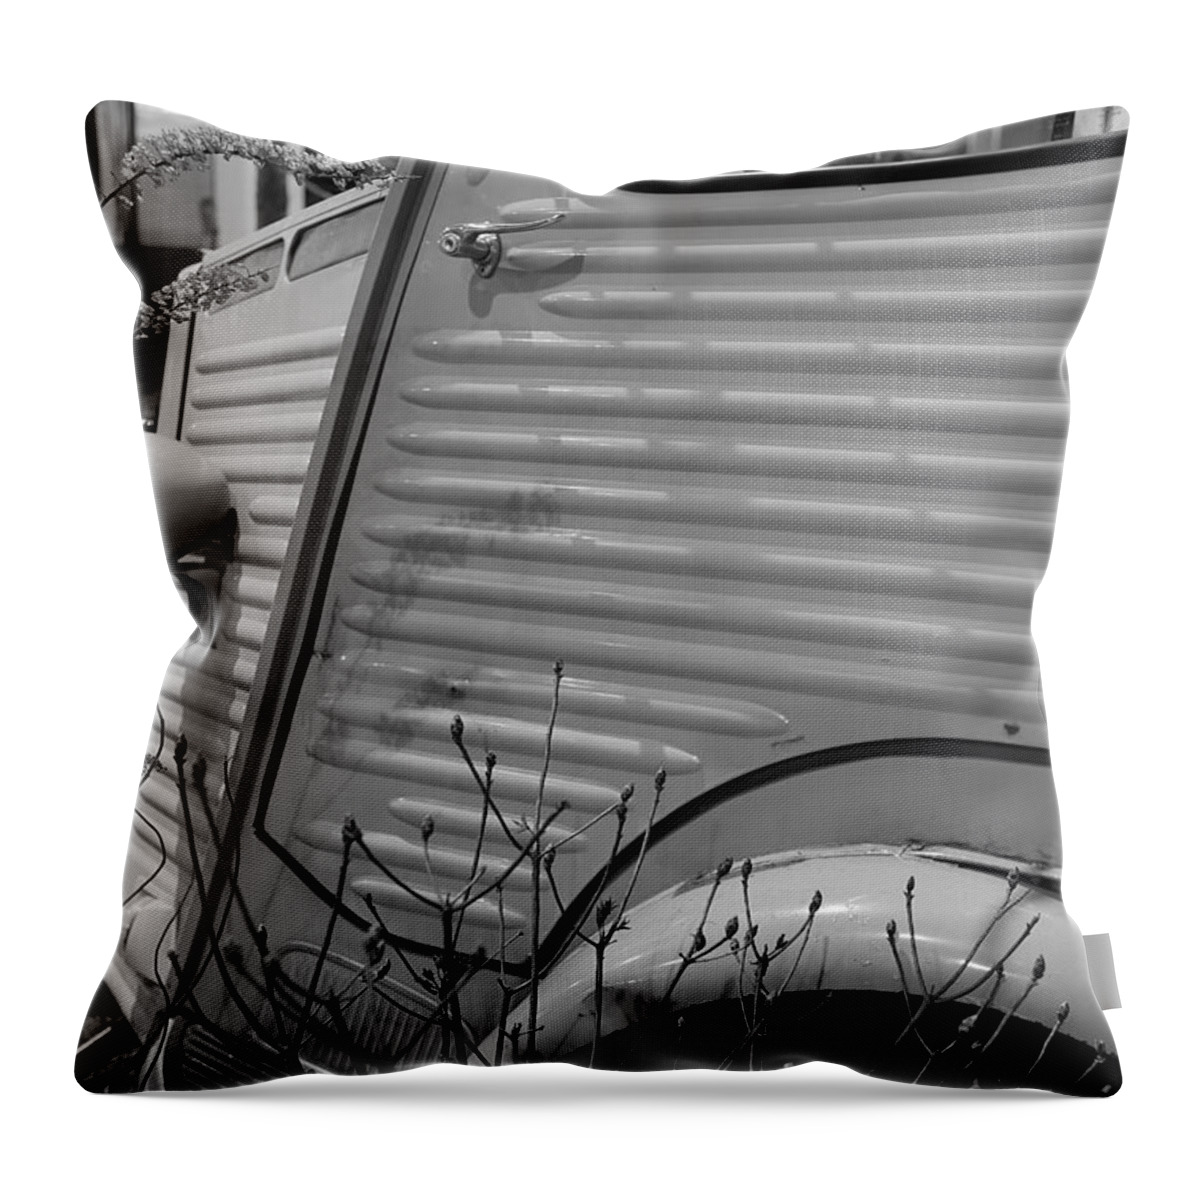 Richard Reeve Throw Pillow featuring the photograph Citroen H Van in Mono Study 1 by Richard Reeve